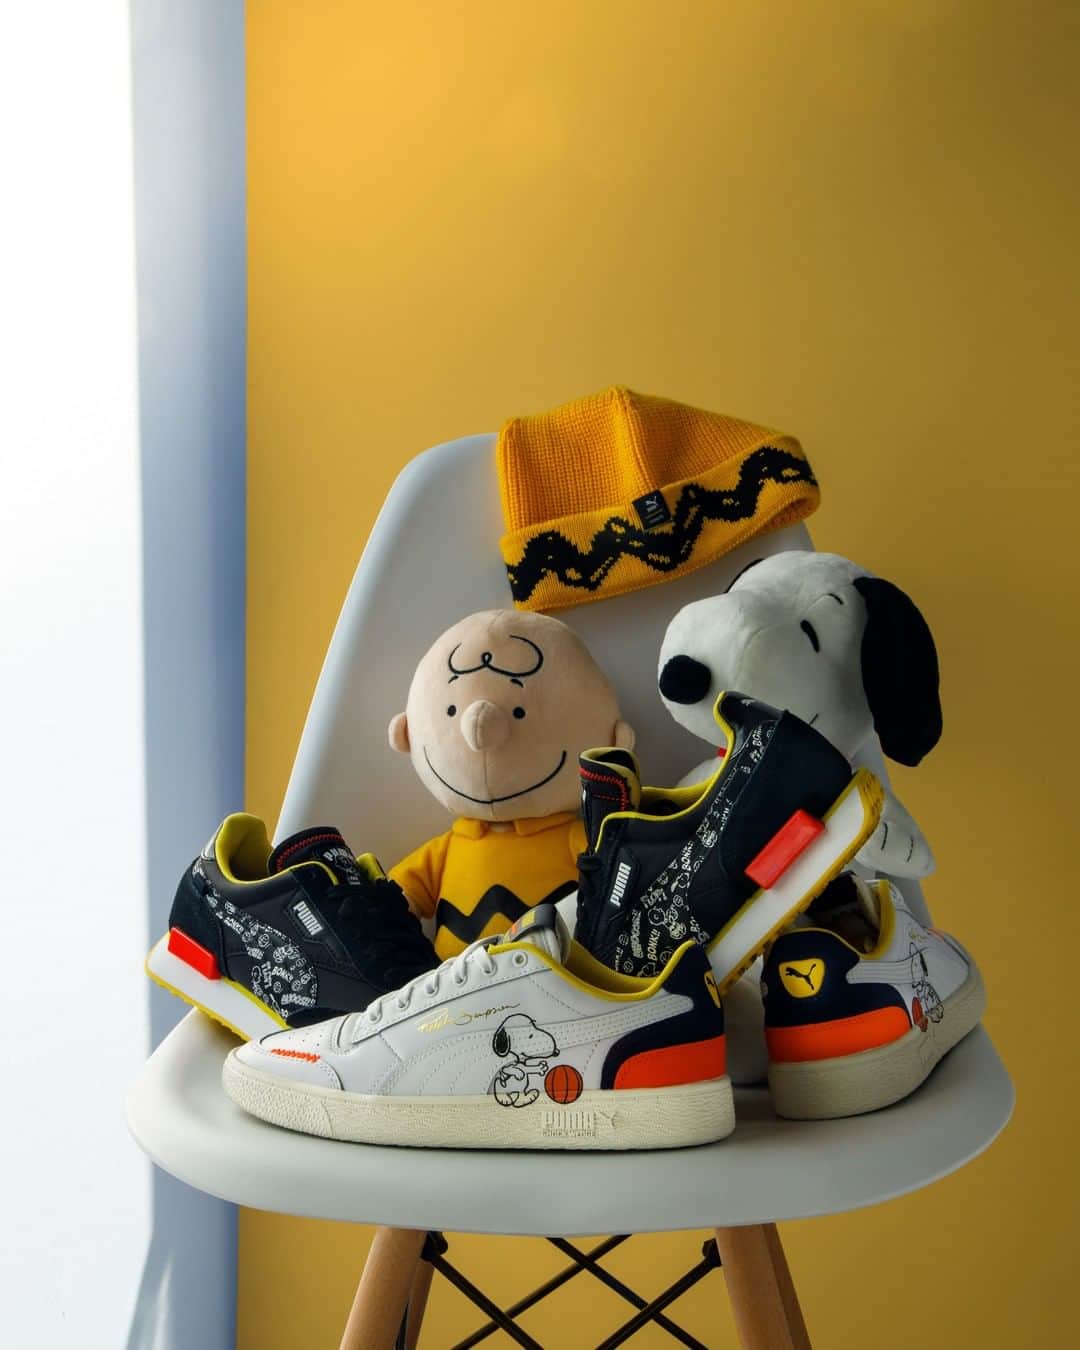 アトモスさんのインスタグラム写真 - (アトモスInstagram)「. NOW ON SALE PUMA × PEANUTS COLLECTION "PEANUTS"は1950年より新聞の4コマ漫画として連載がスタートされ、2020年で70周年を迎える漫画作品。総作品数は17897作、掲載された雑誌は2000を越え、世界75か国、21言語で3億5500万人以上の読者を持ち、コミック総発行部数は4億部を越えた他、数多くの賞を獲得するなど人気を誇っている。今回はそんなPEANUTSとのタイアップコレクション。作品内に登場するキャラクターがPUMAの関連するスポーツとリンクしたグラフィックを採用しデザインに落とし込まれている。最も重要なキャラクターである スヌーピー、チャーリー・ブラウンが採用されたアイテムは可愛げがありながらも、カルチャーシーンに溶け込んだ仕上がりとなっている。 . PUMA x PEANUTS Collection will be released from 2/6 (SAT). "PEANUTS" is a manga work that started serialization as a four-frame manga in newspapers in 1950 and will celebrate its 70th anniversary in 2020. The total number of works is 17897, the number of magazines published exceeds 2000, the readership is more than 355 million in 21 languages ​​in 75 countries around the world, the total circulation of comics exceeds 400 million, and many others. It is very popular, such as winning an award. This time is a tie-up collection with such PEANUTS. The characters appearing in the work are incorporated into the design by adopting graphics linked to PUMA's related sports. The items featuring the most important characters, Snoopy and Charlie Brown, are cute yet blended into the culture scene. .. #puma #atmos #peanuts #snoopy #charliebrown #アトモス #プーマ」2月16日 10時47分 - atmos_japan